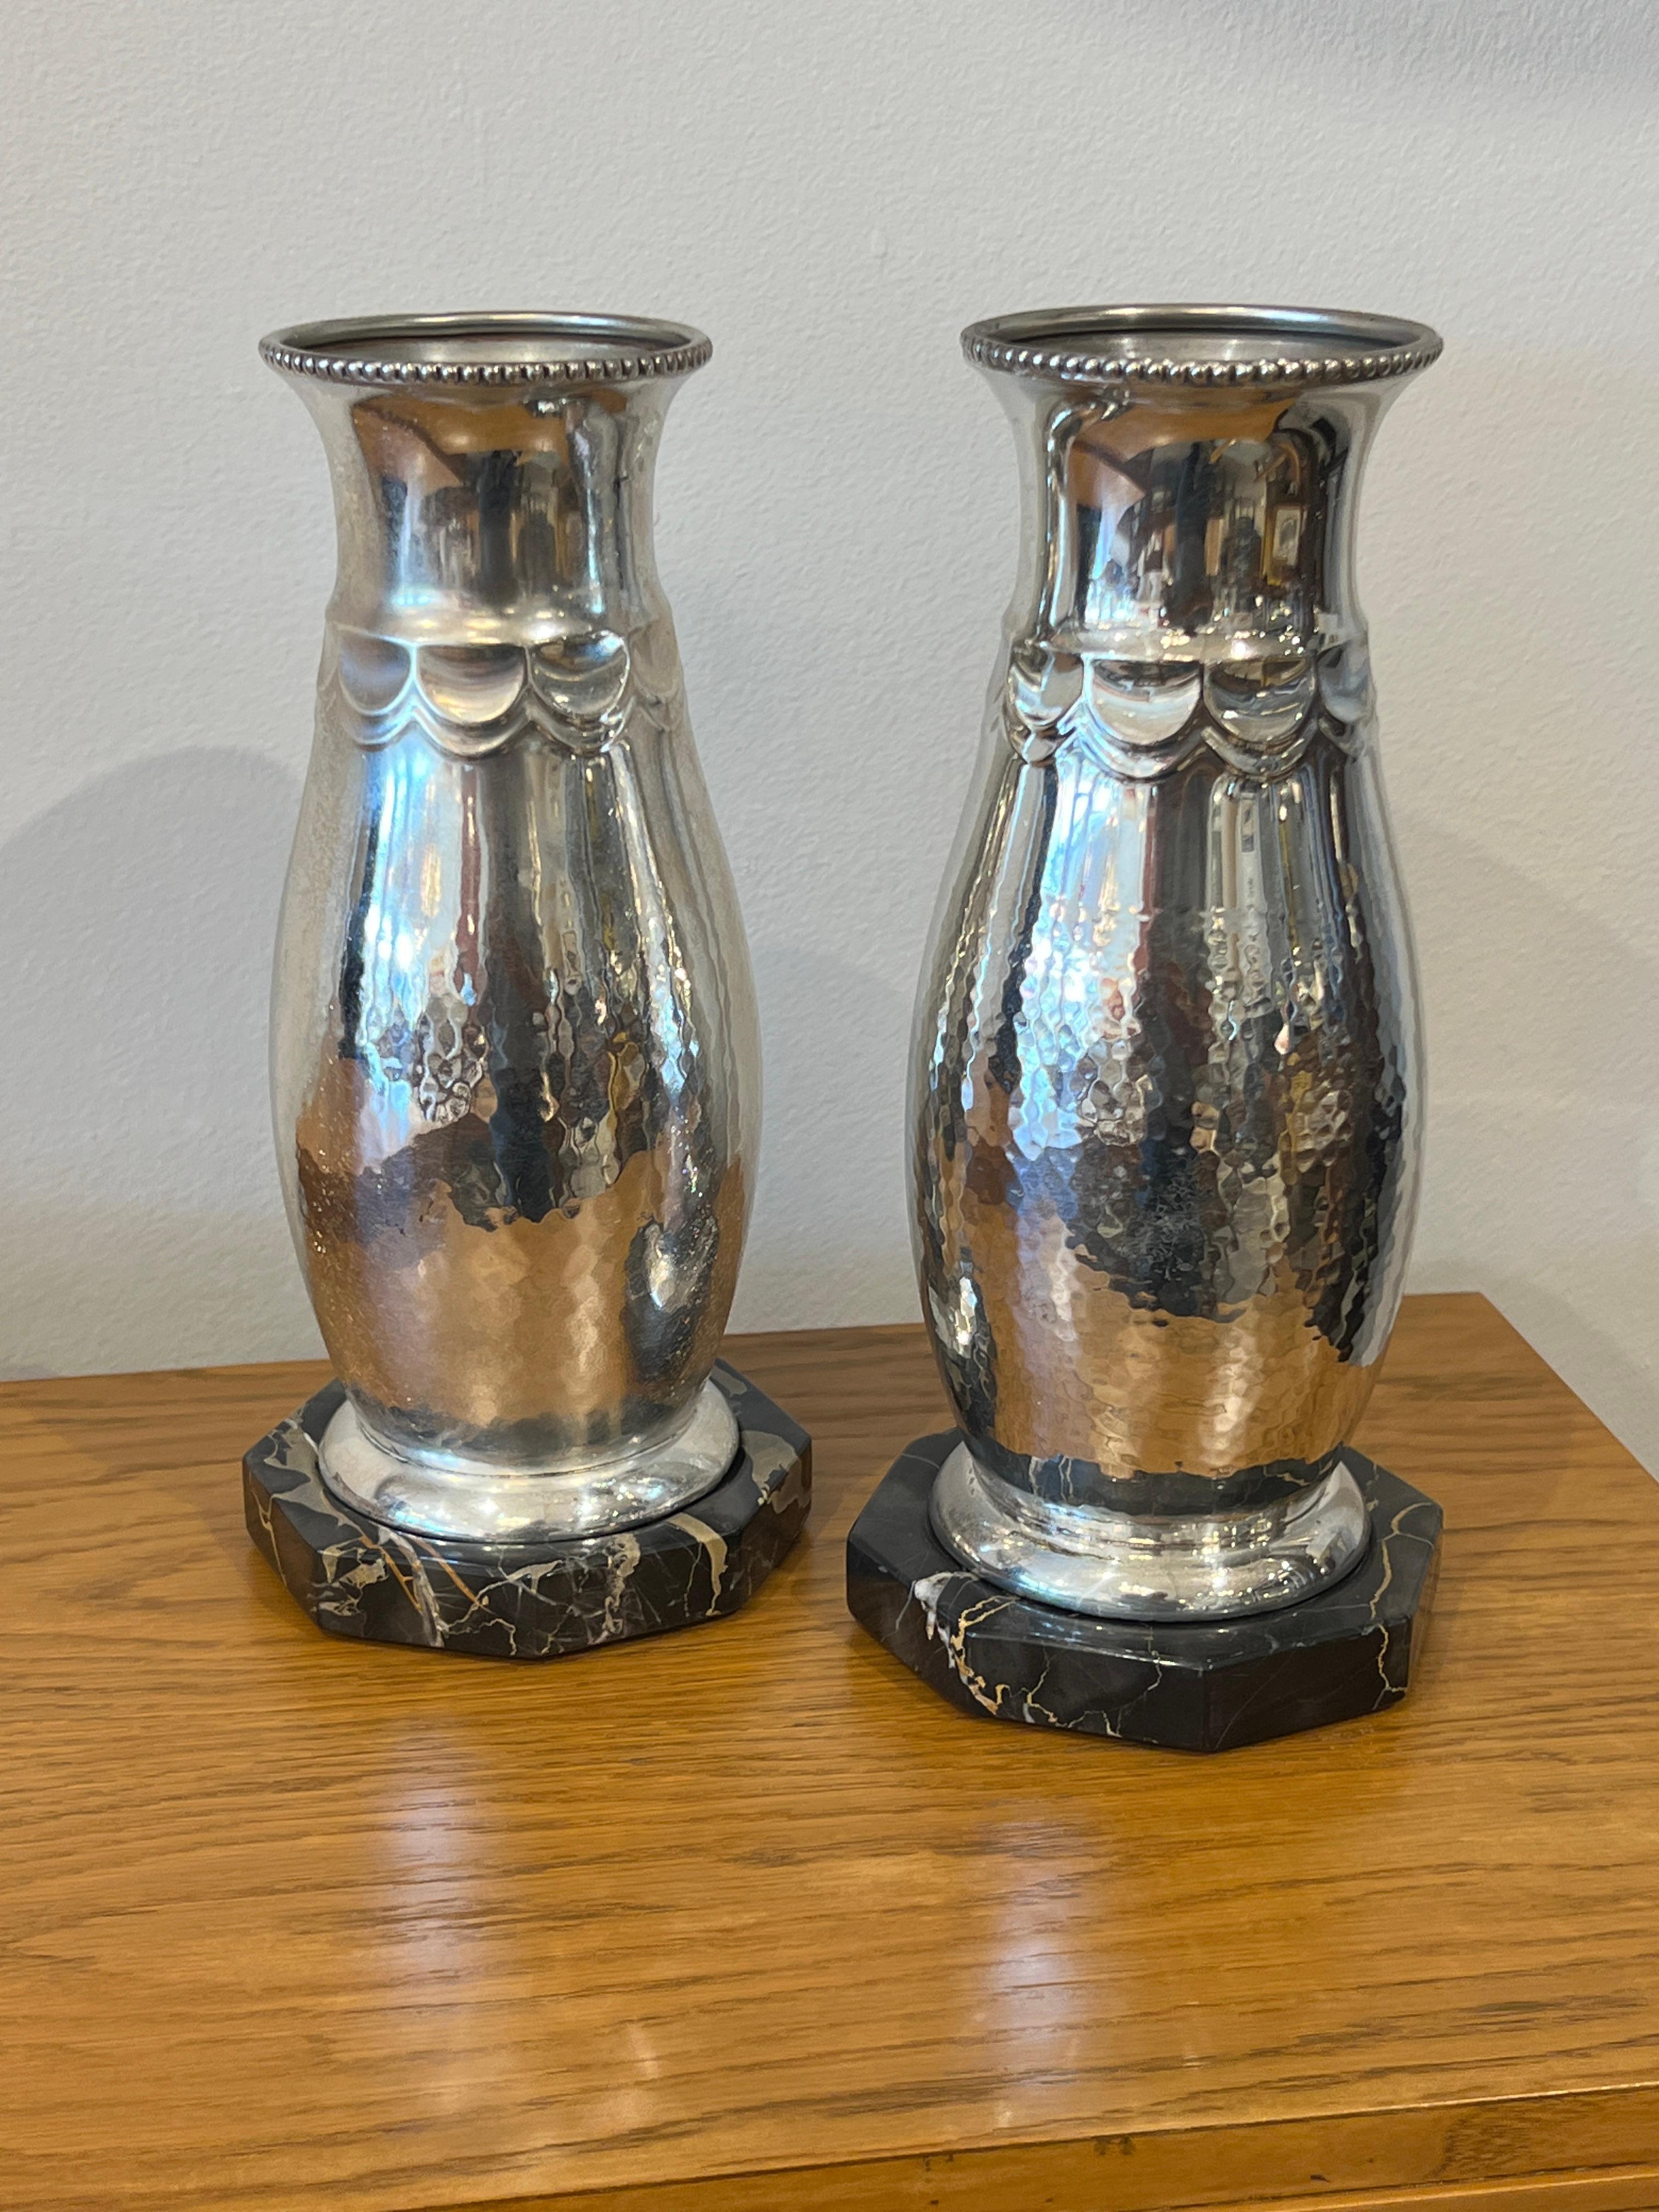 A pair of Beautiful Art Deco Silver Plated vases with portoro Marble bases.
Made in Gernany
Made in Circa: 1930